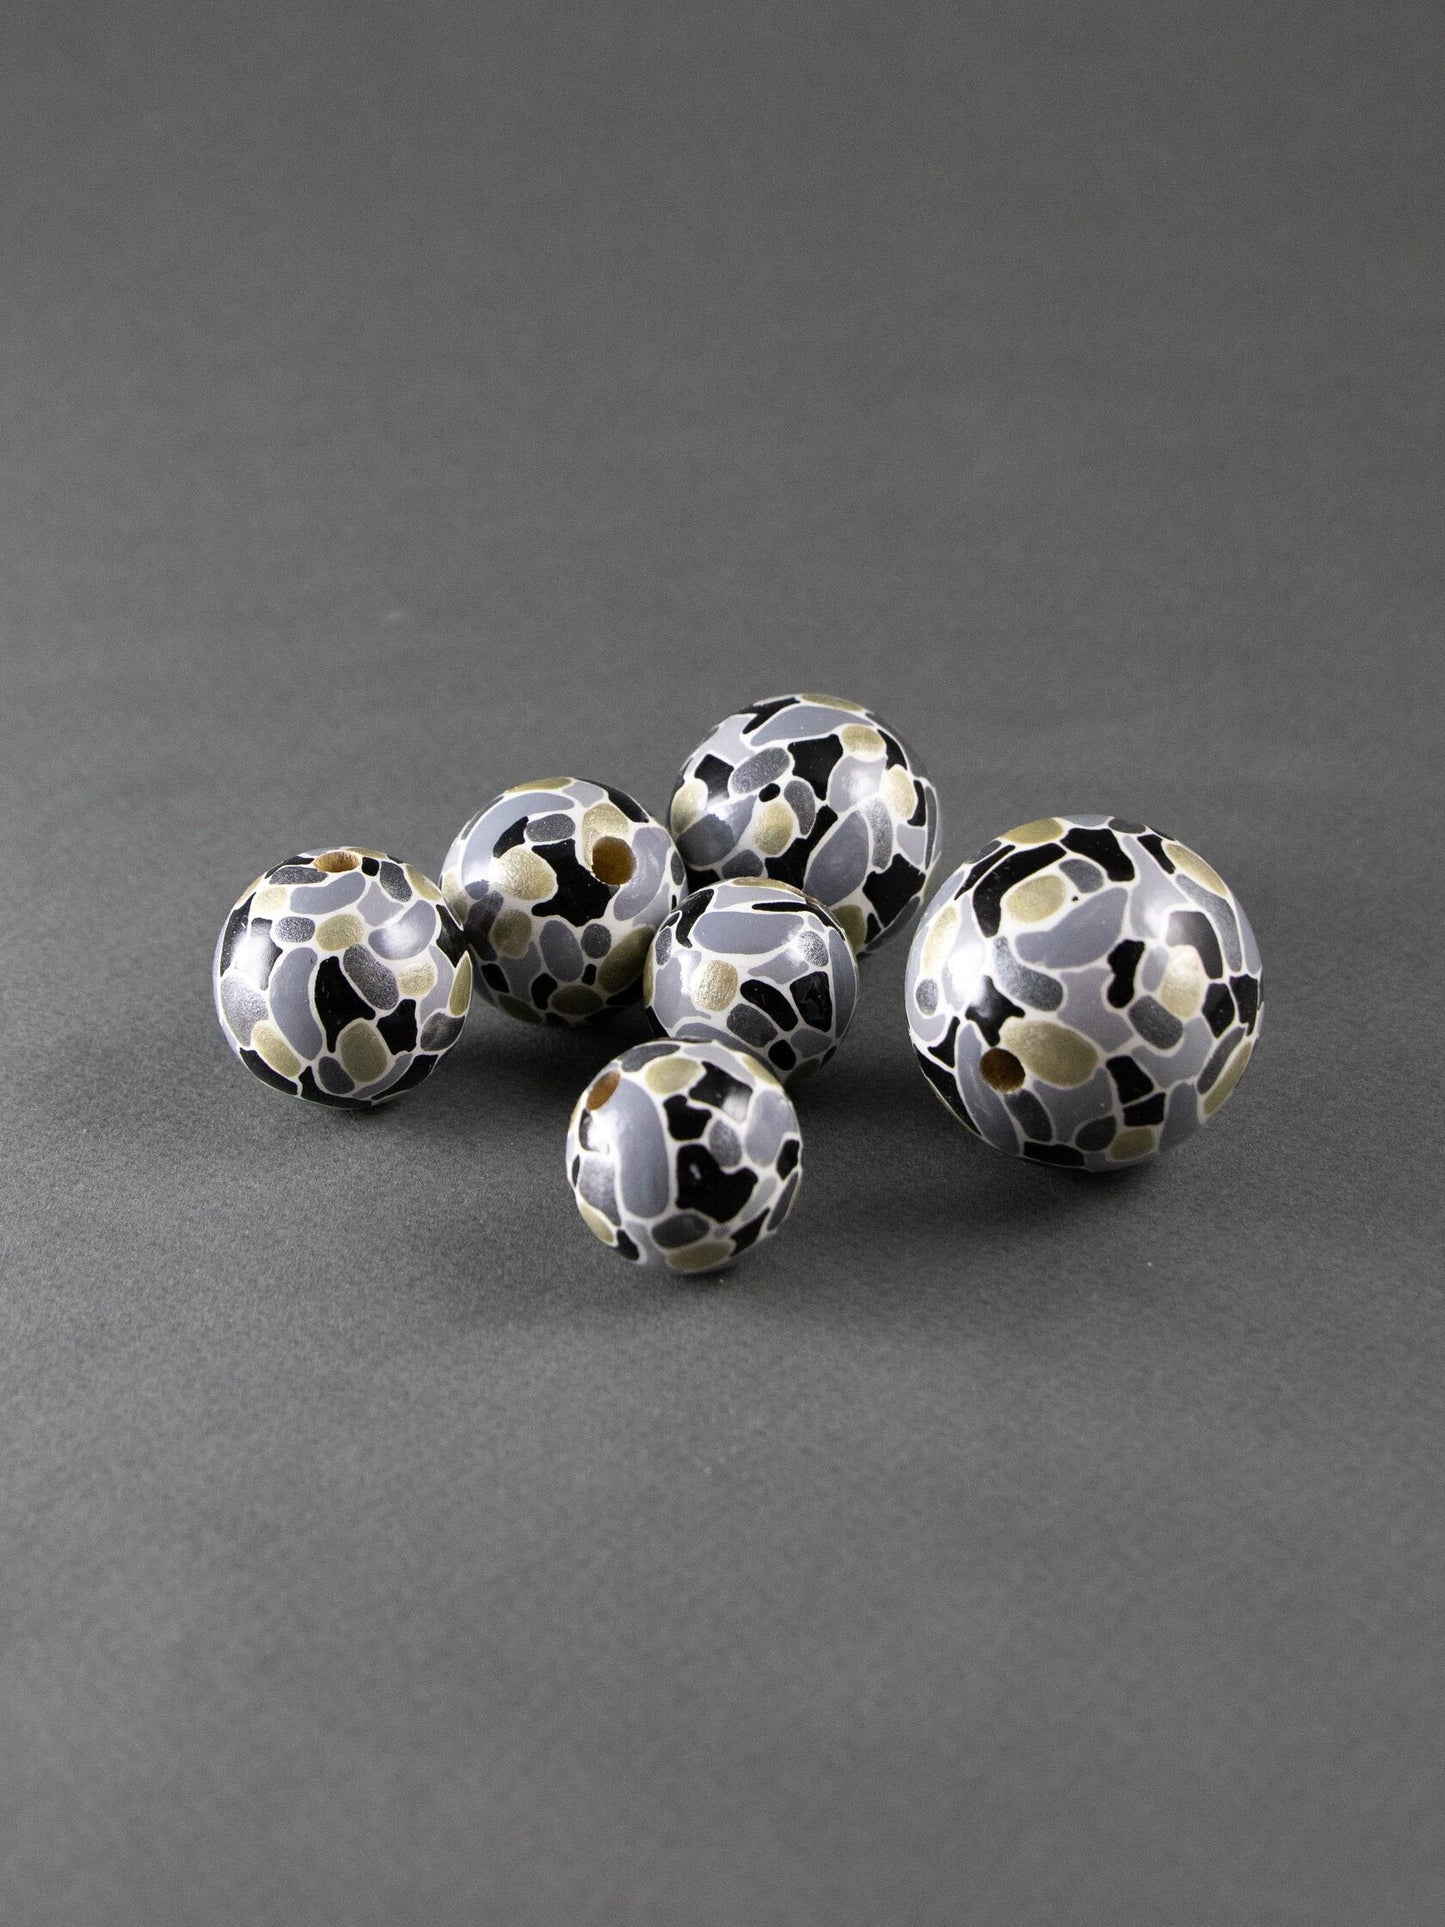 Abstract Gray Wooden Bead